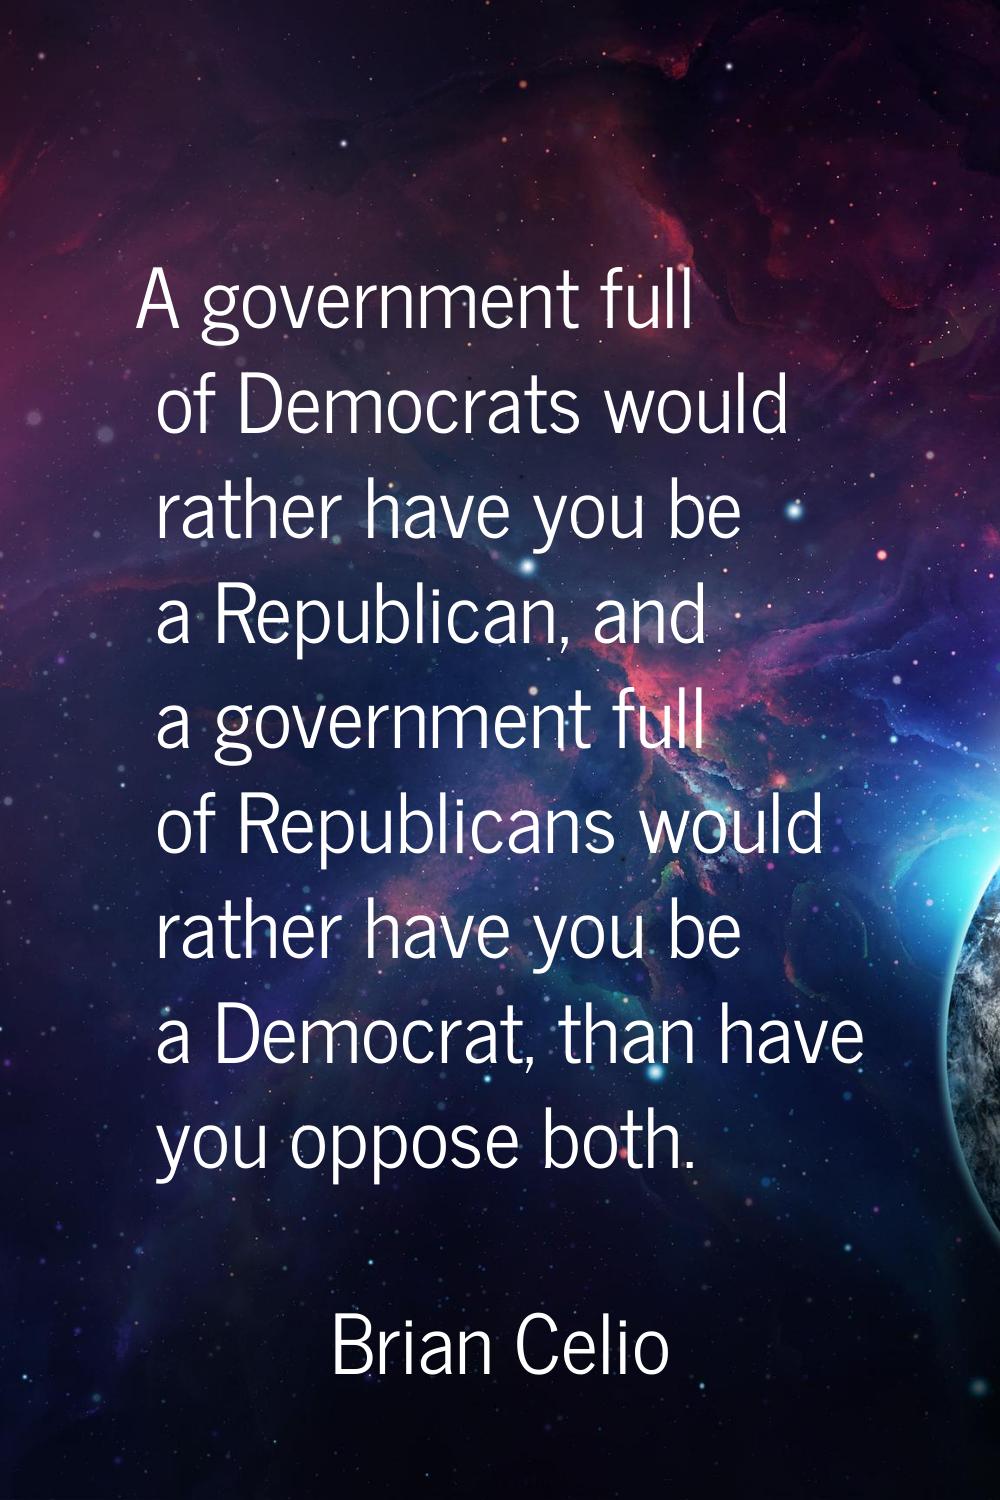 A government full of Democrats would rather have you be a Republican, and a government full of Repu